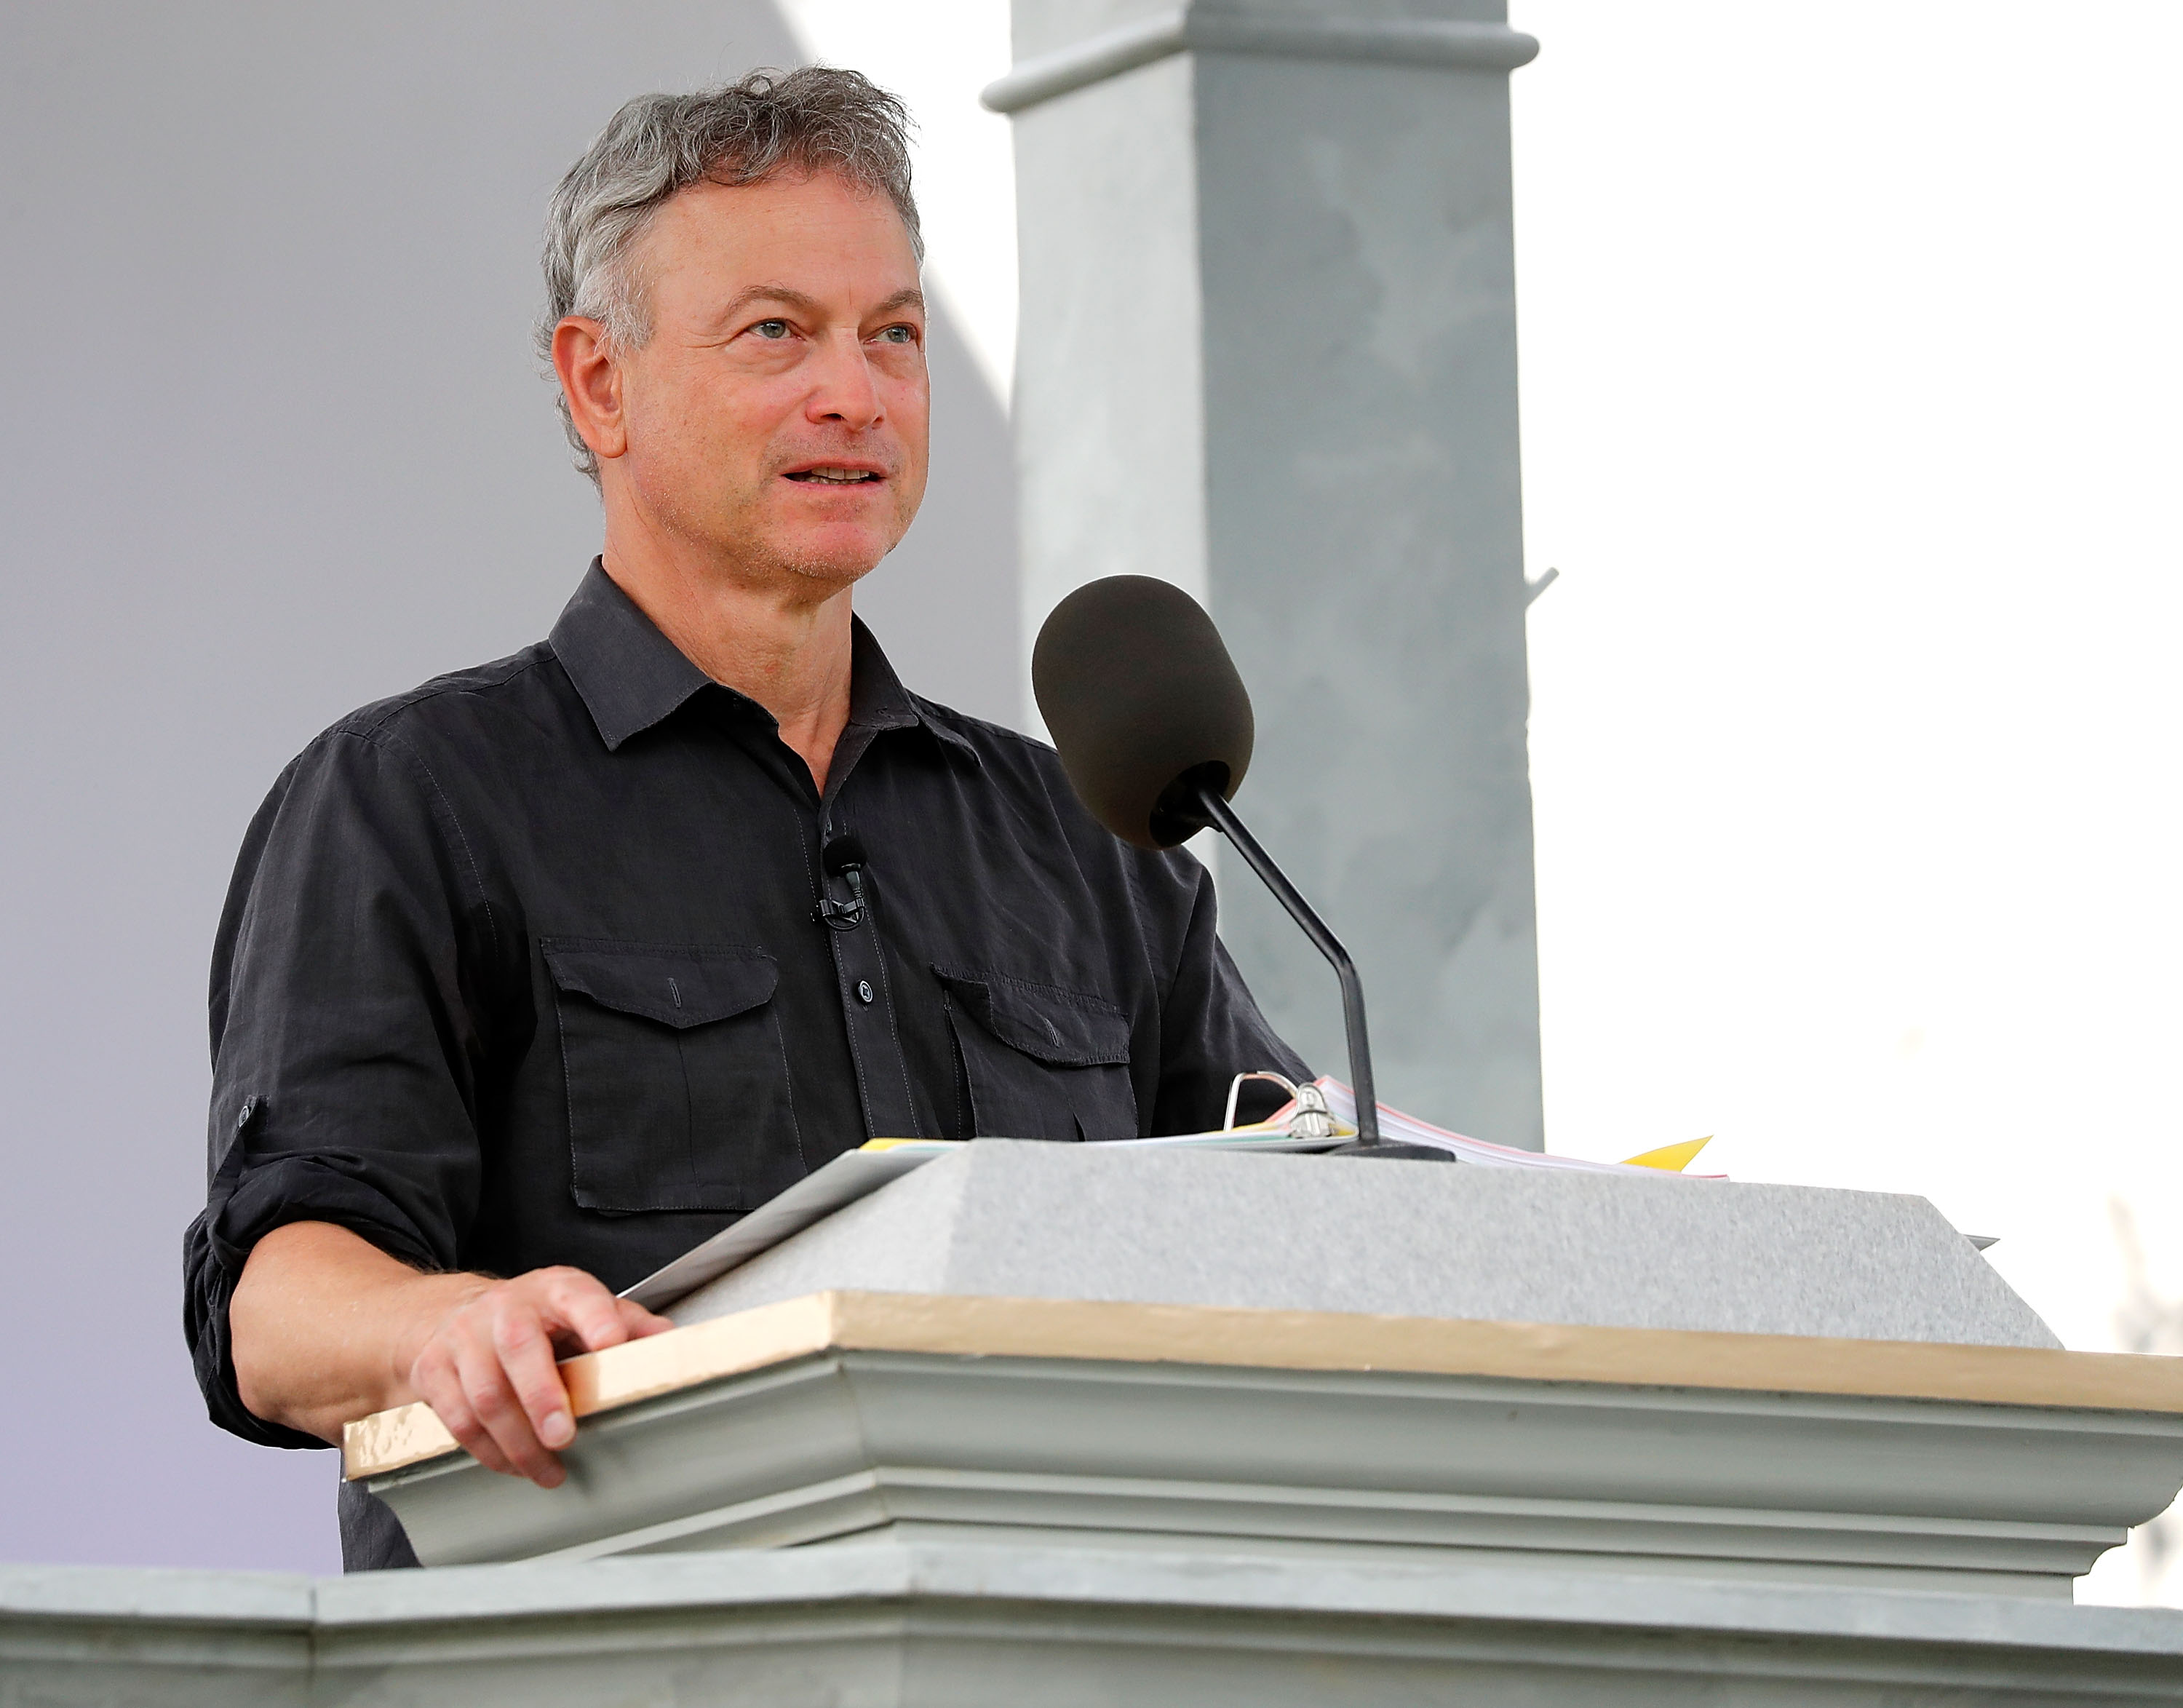 Gary Sinise speaking during the 2018 National Memorial Day Concert rehearsals at the U.S. Capitol West Lawn on May 26, 2018 in Washington, D.C. | Source: Getty Images